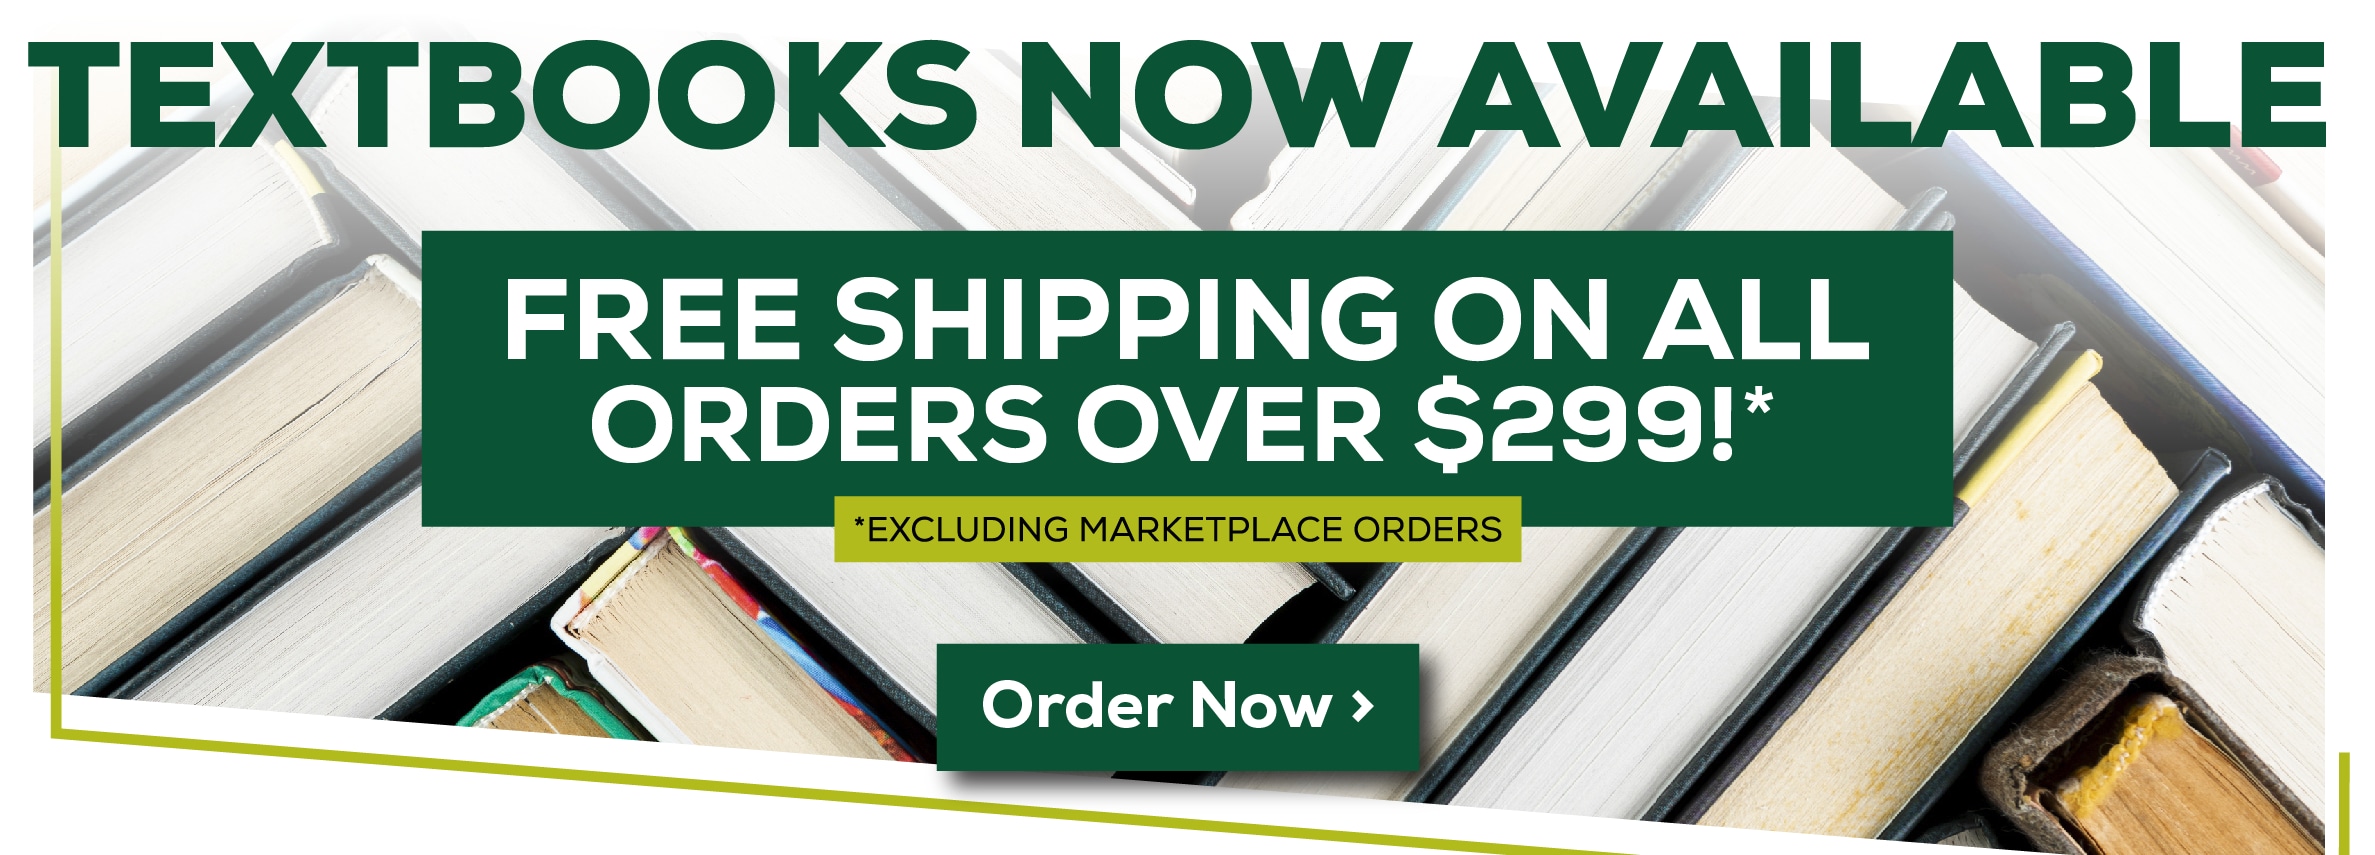 TEXTBOOKS NOW AVAILABLE FREE SHIPPING ON ALL ORDERS OVER $299!* *EXCLUDING MARKETPLACE ORDERS Order Now >